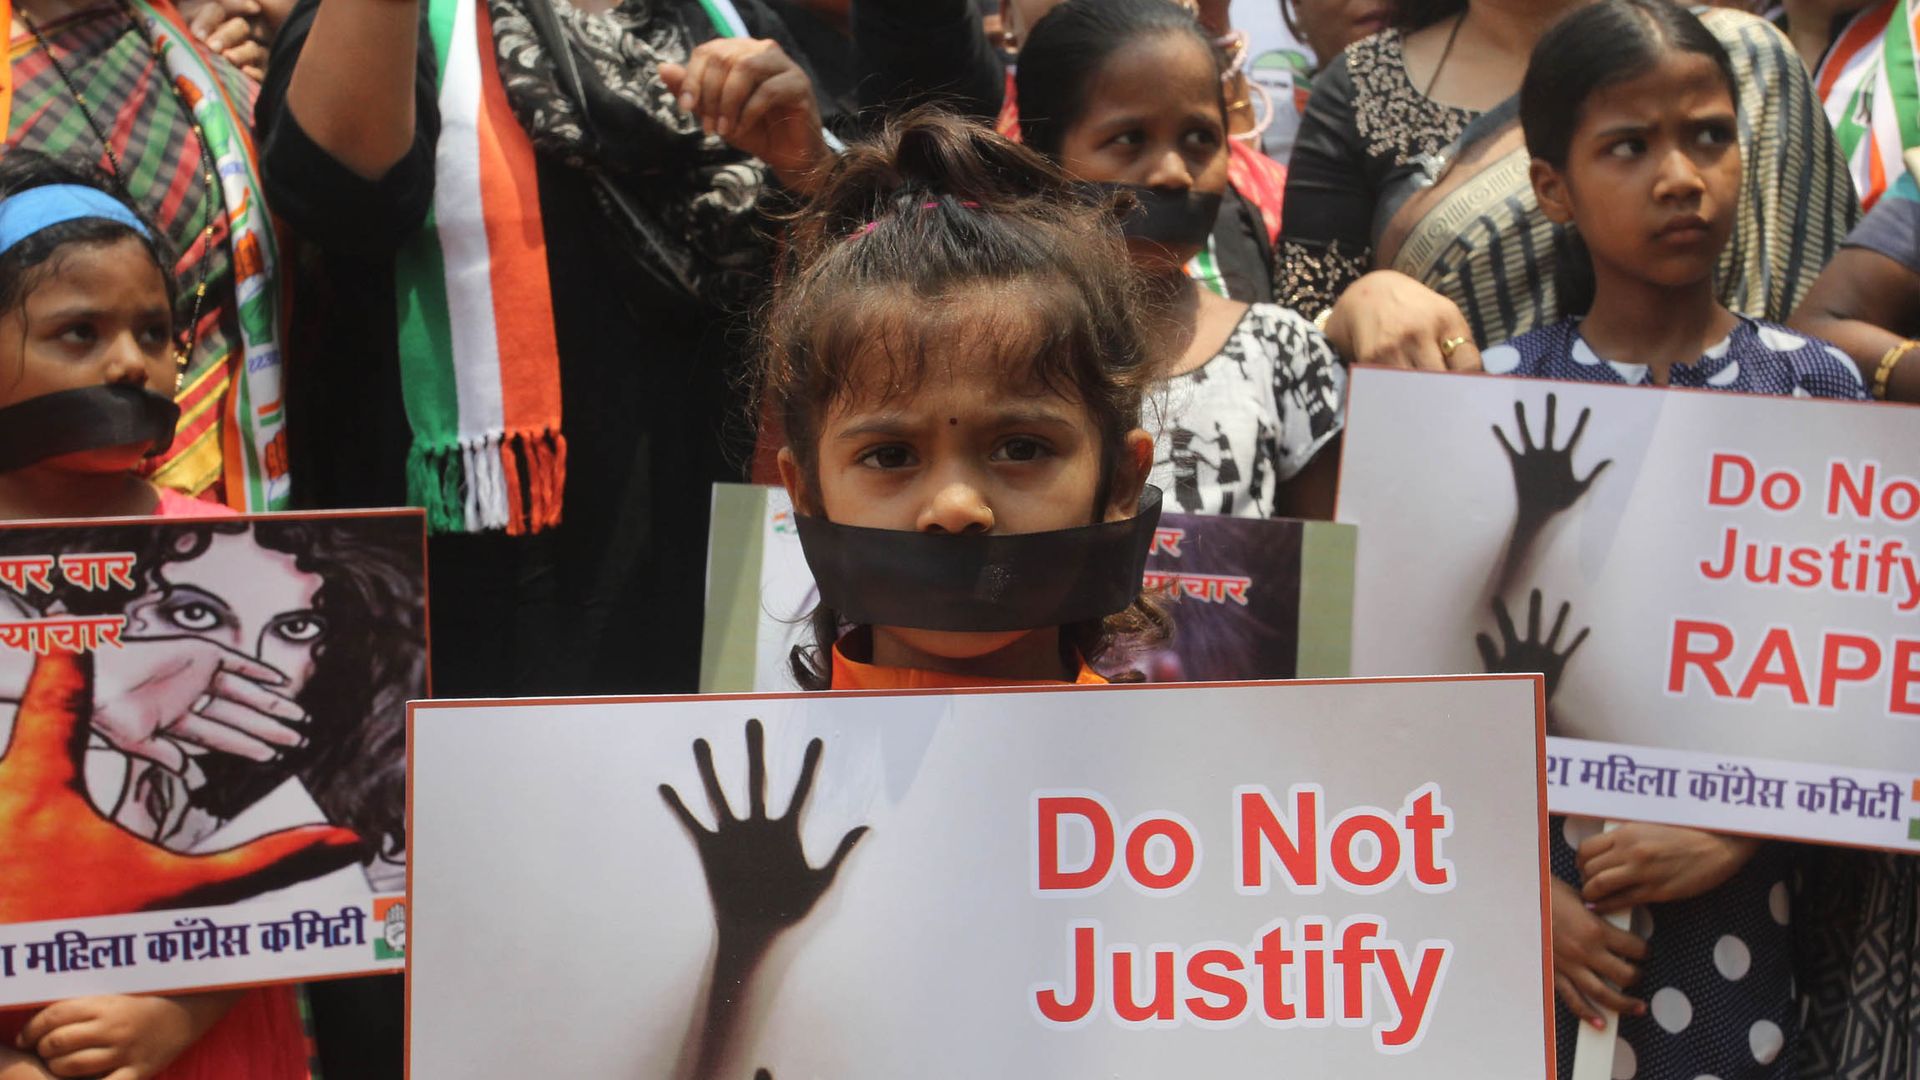 A young girl holds a sign that reads "Do not justify rape."